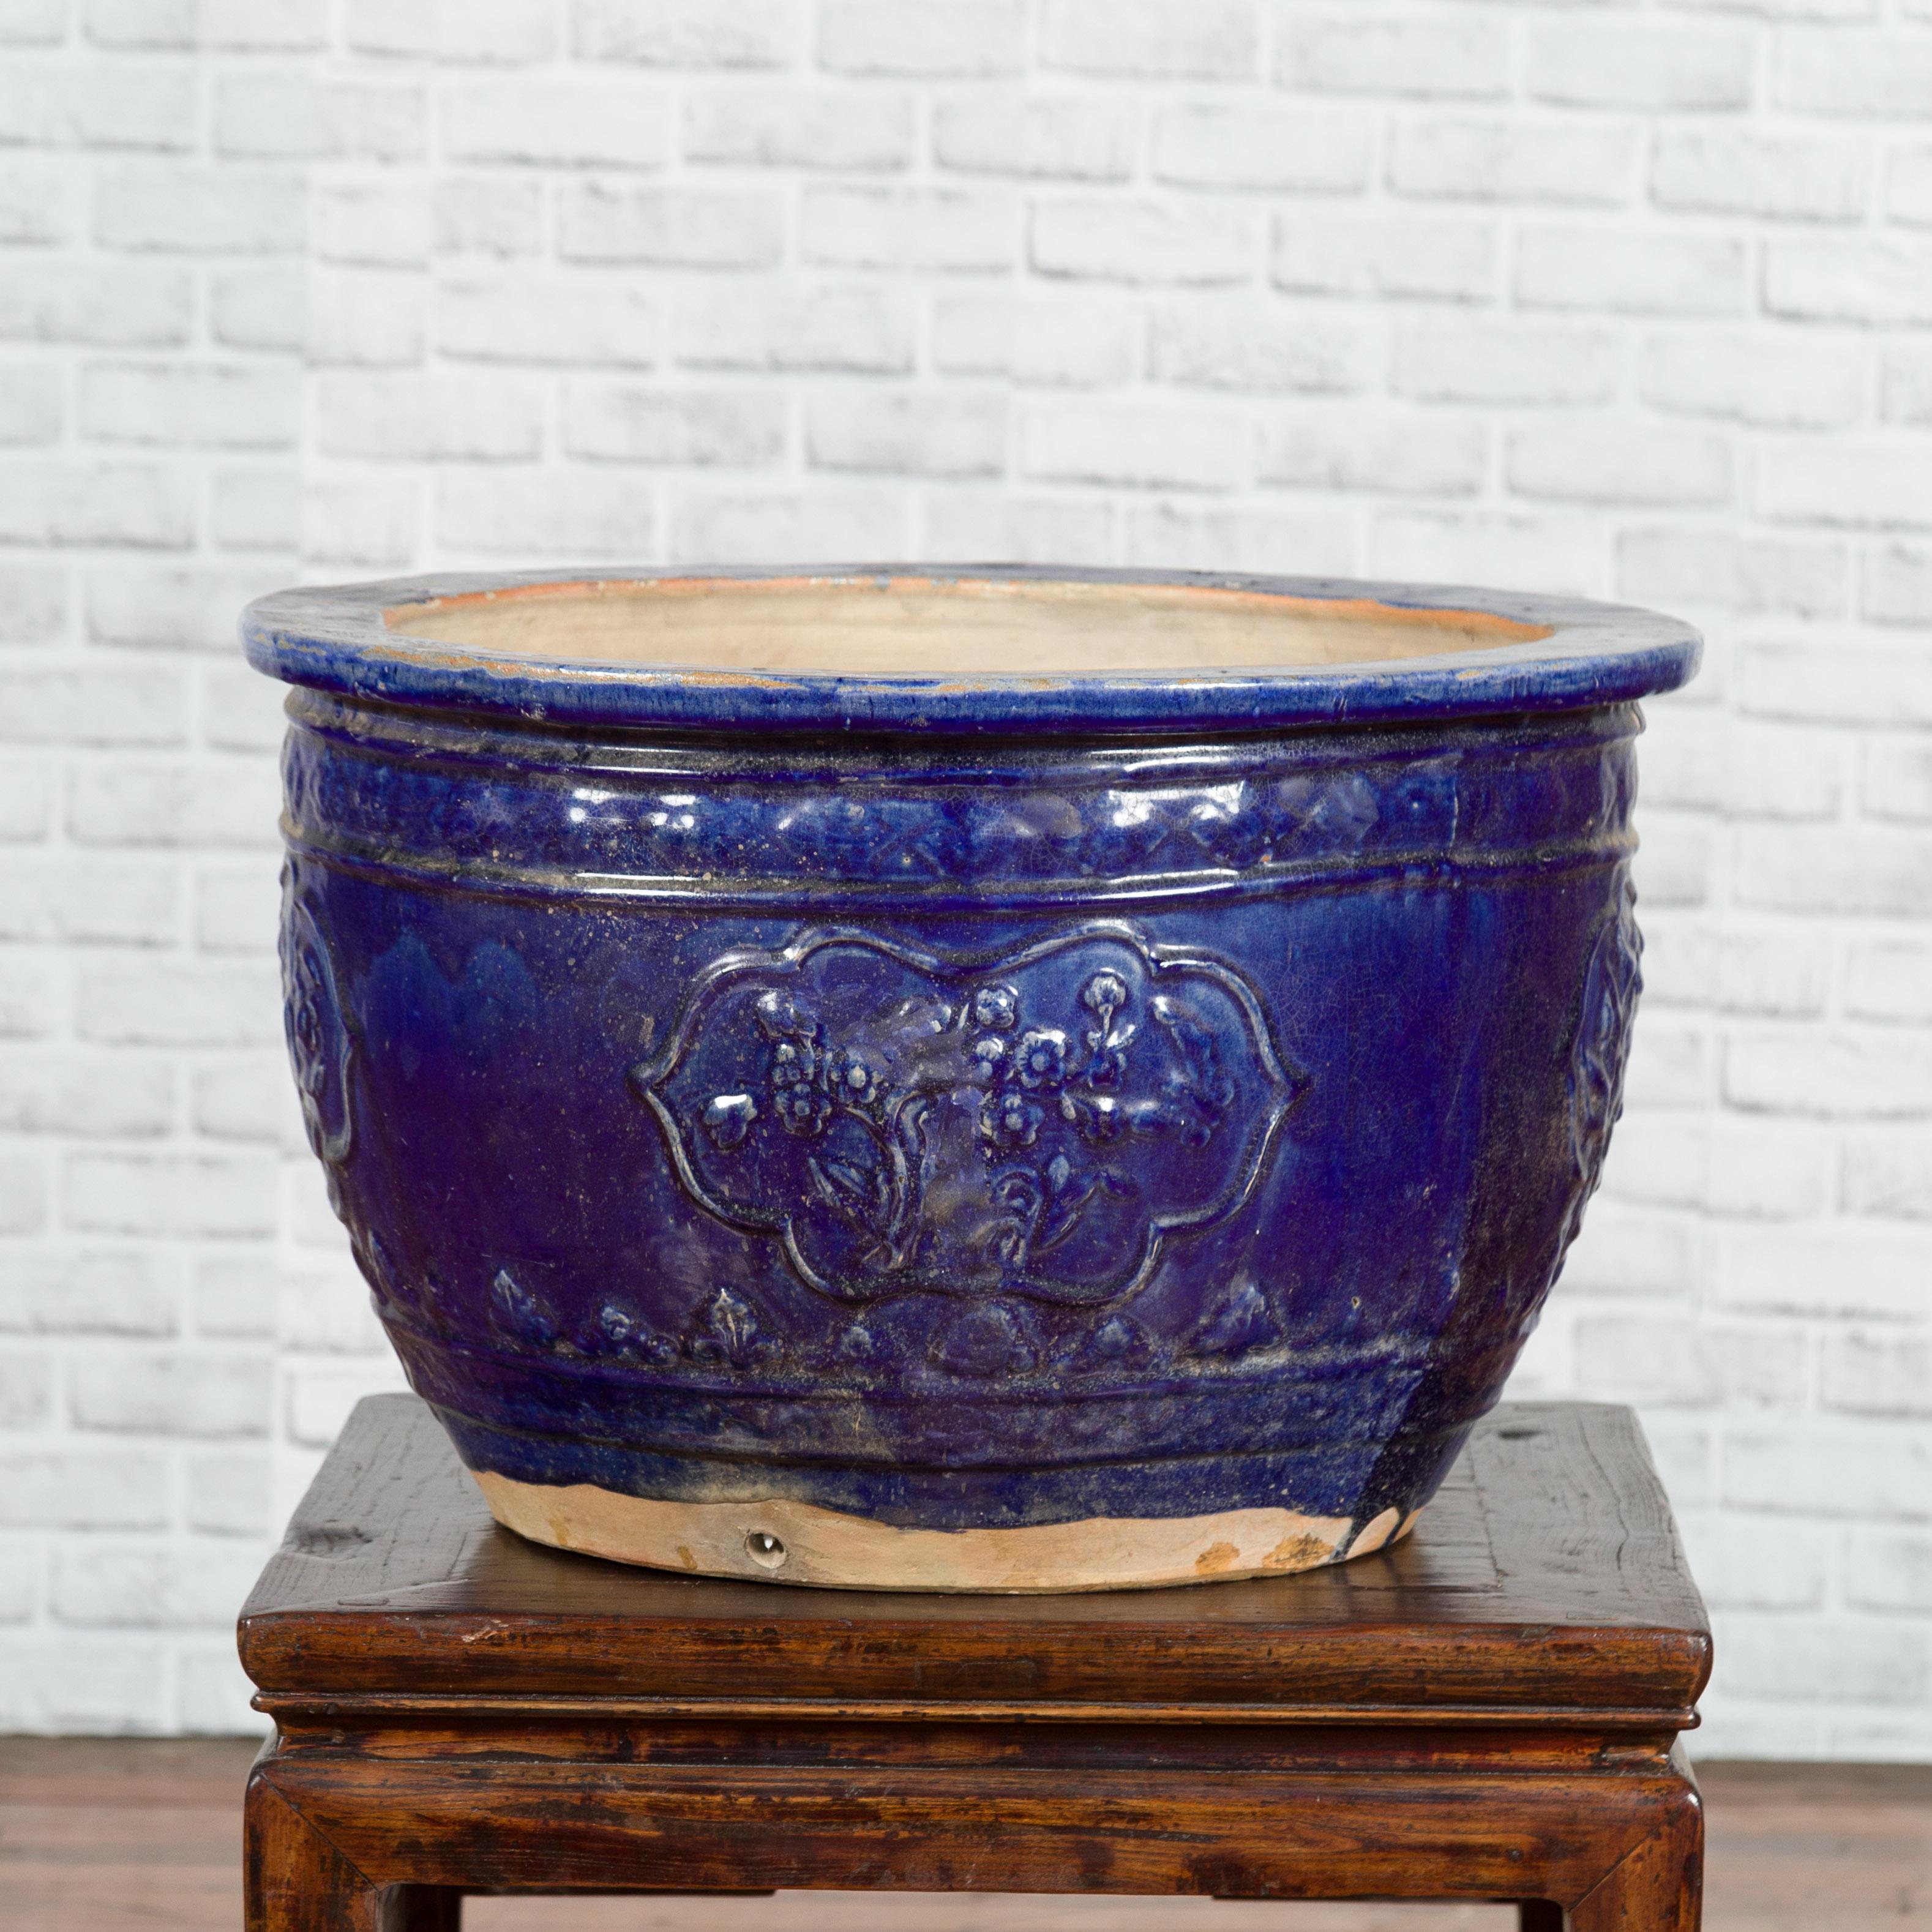 A large Vietnamese Annamese royal blue planter from the 19th century with floral décor. Handcrafted during the 19th century, this planter features a circular silhouette adorned with a royal blue glaze showing a nicely weathered appearance. Decorated